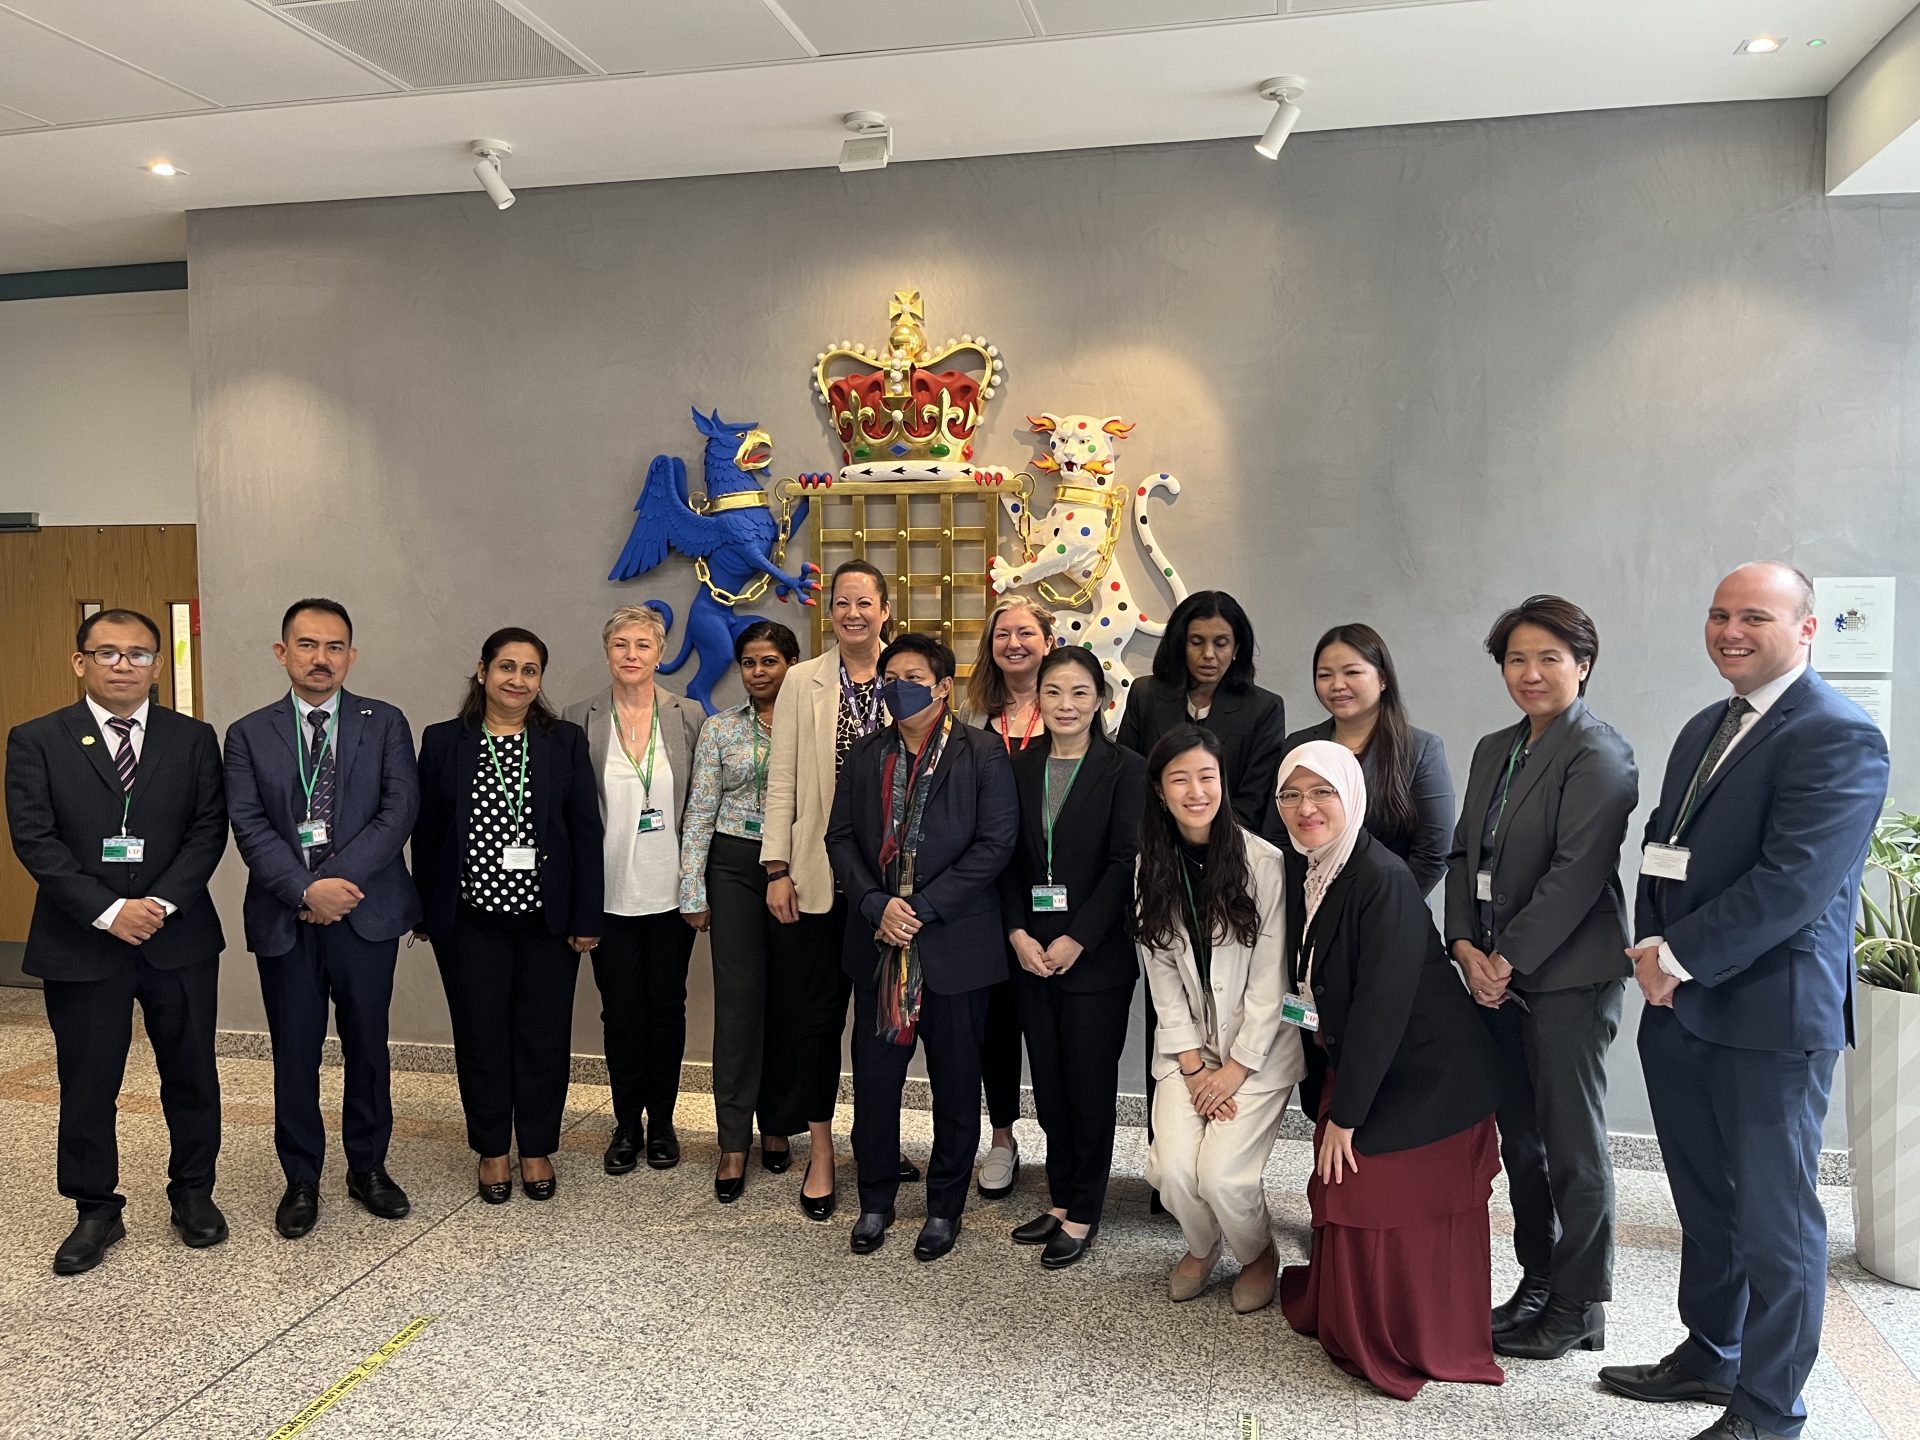 IWF CEO Susie Hargreaves OBE and IWF Head of Policy and Public Affairs Michael Tunks can be seen fourth from left and far right respectively with Malaysian parliamentary members at the NCA in London in May 1/2